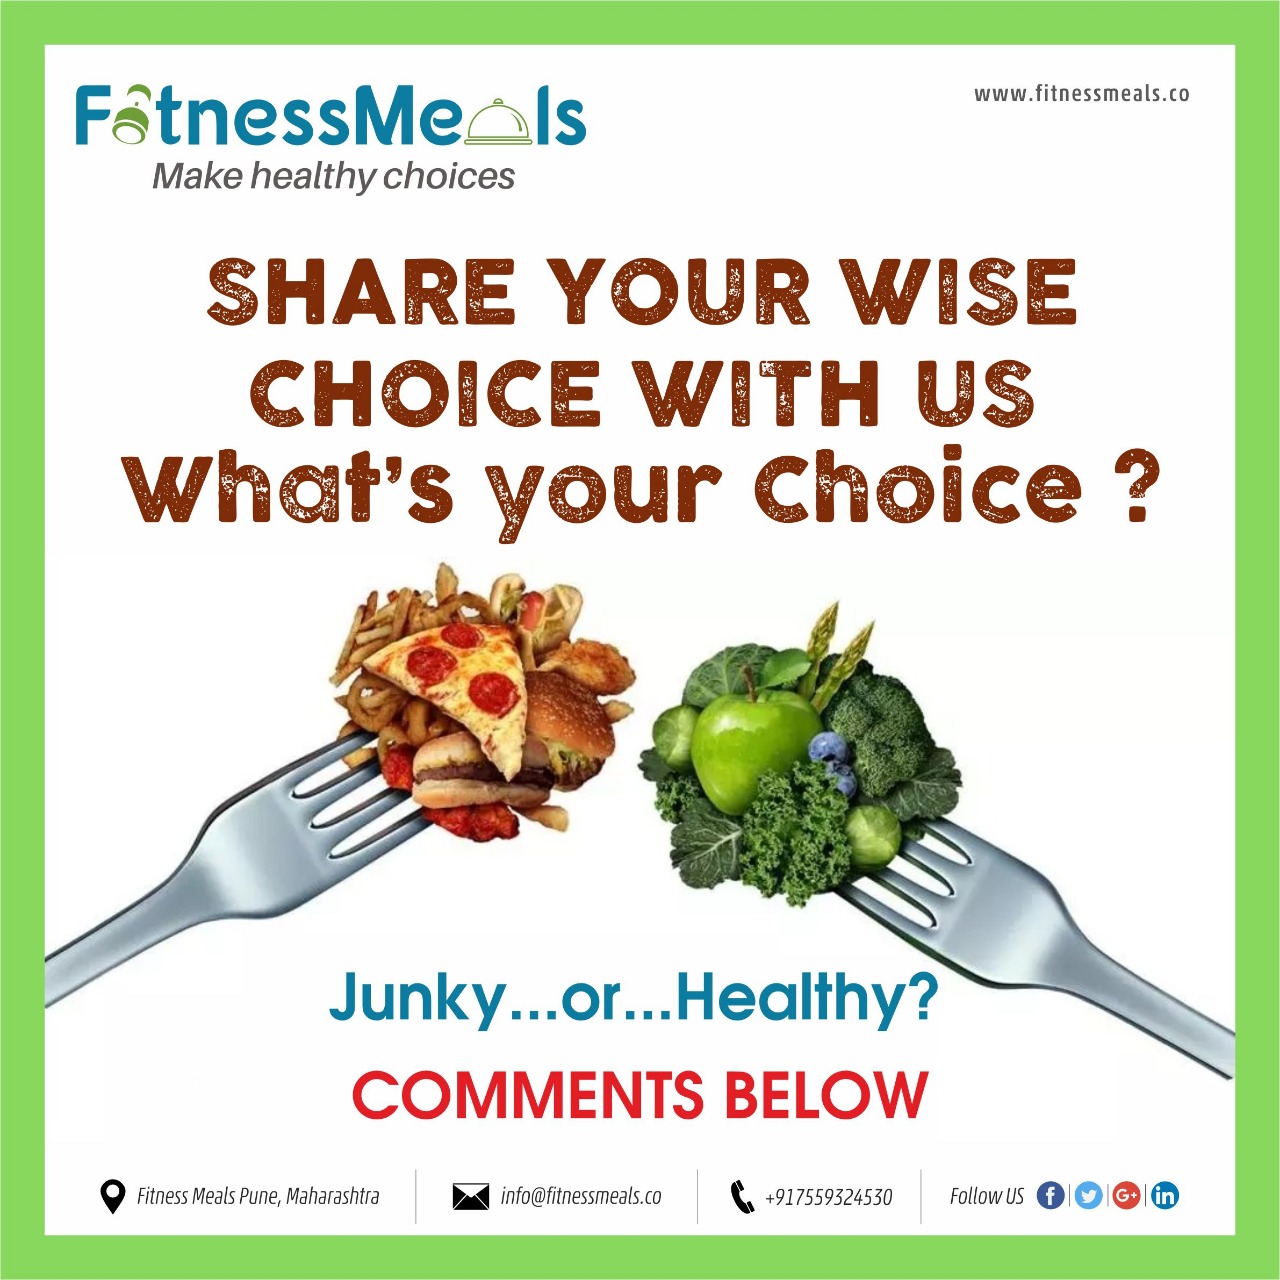 Fitness Meals Pune